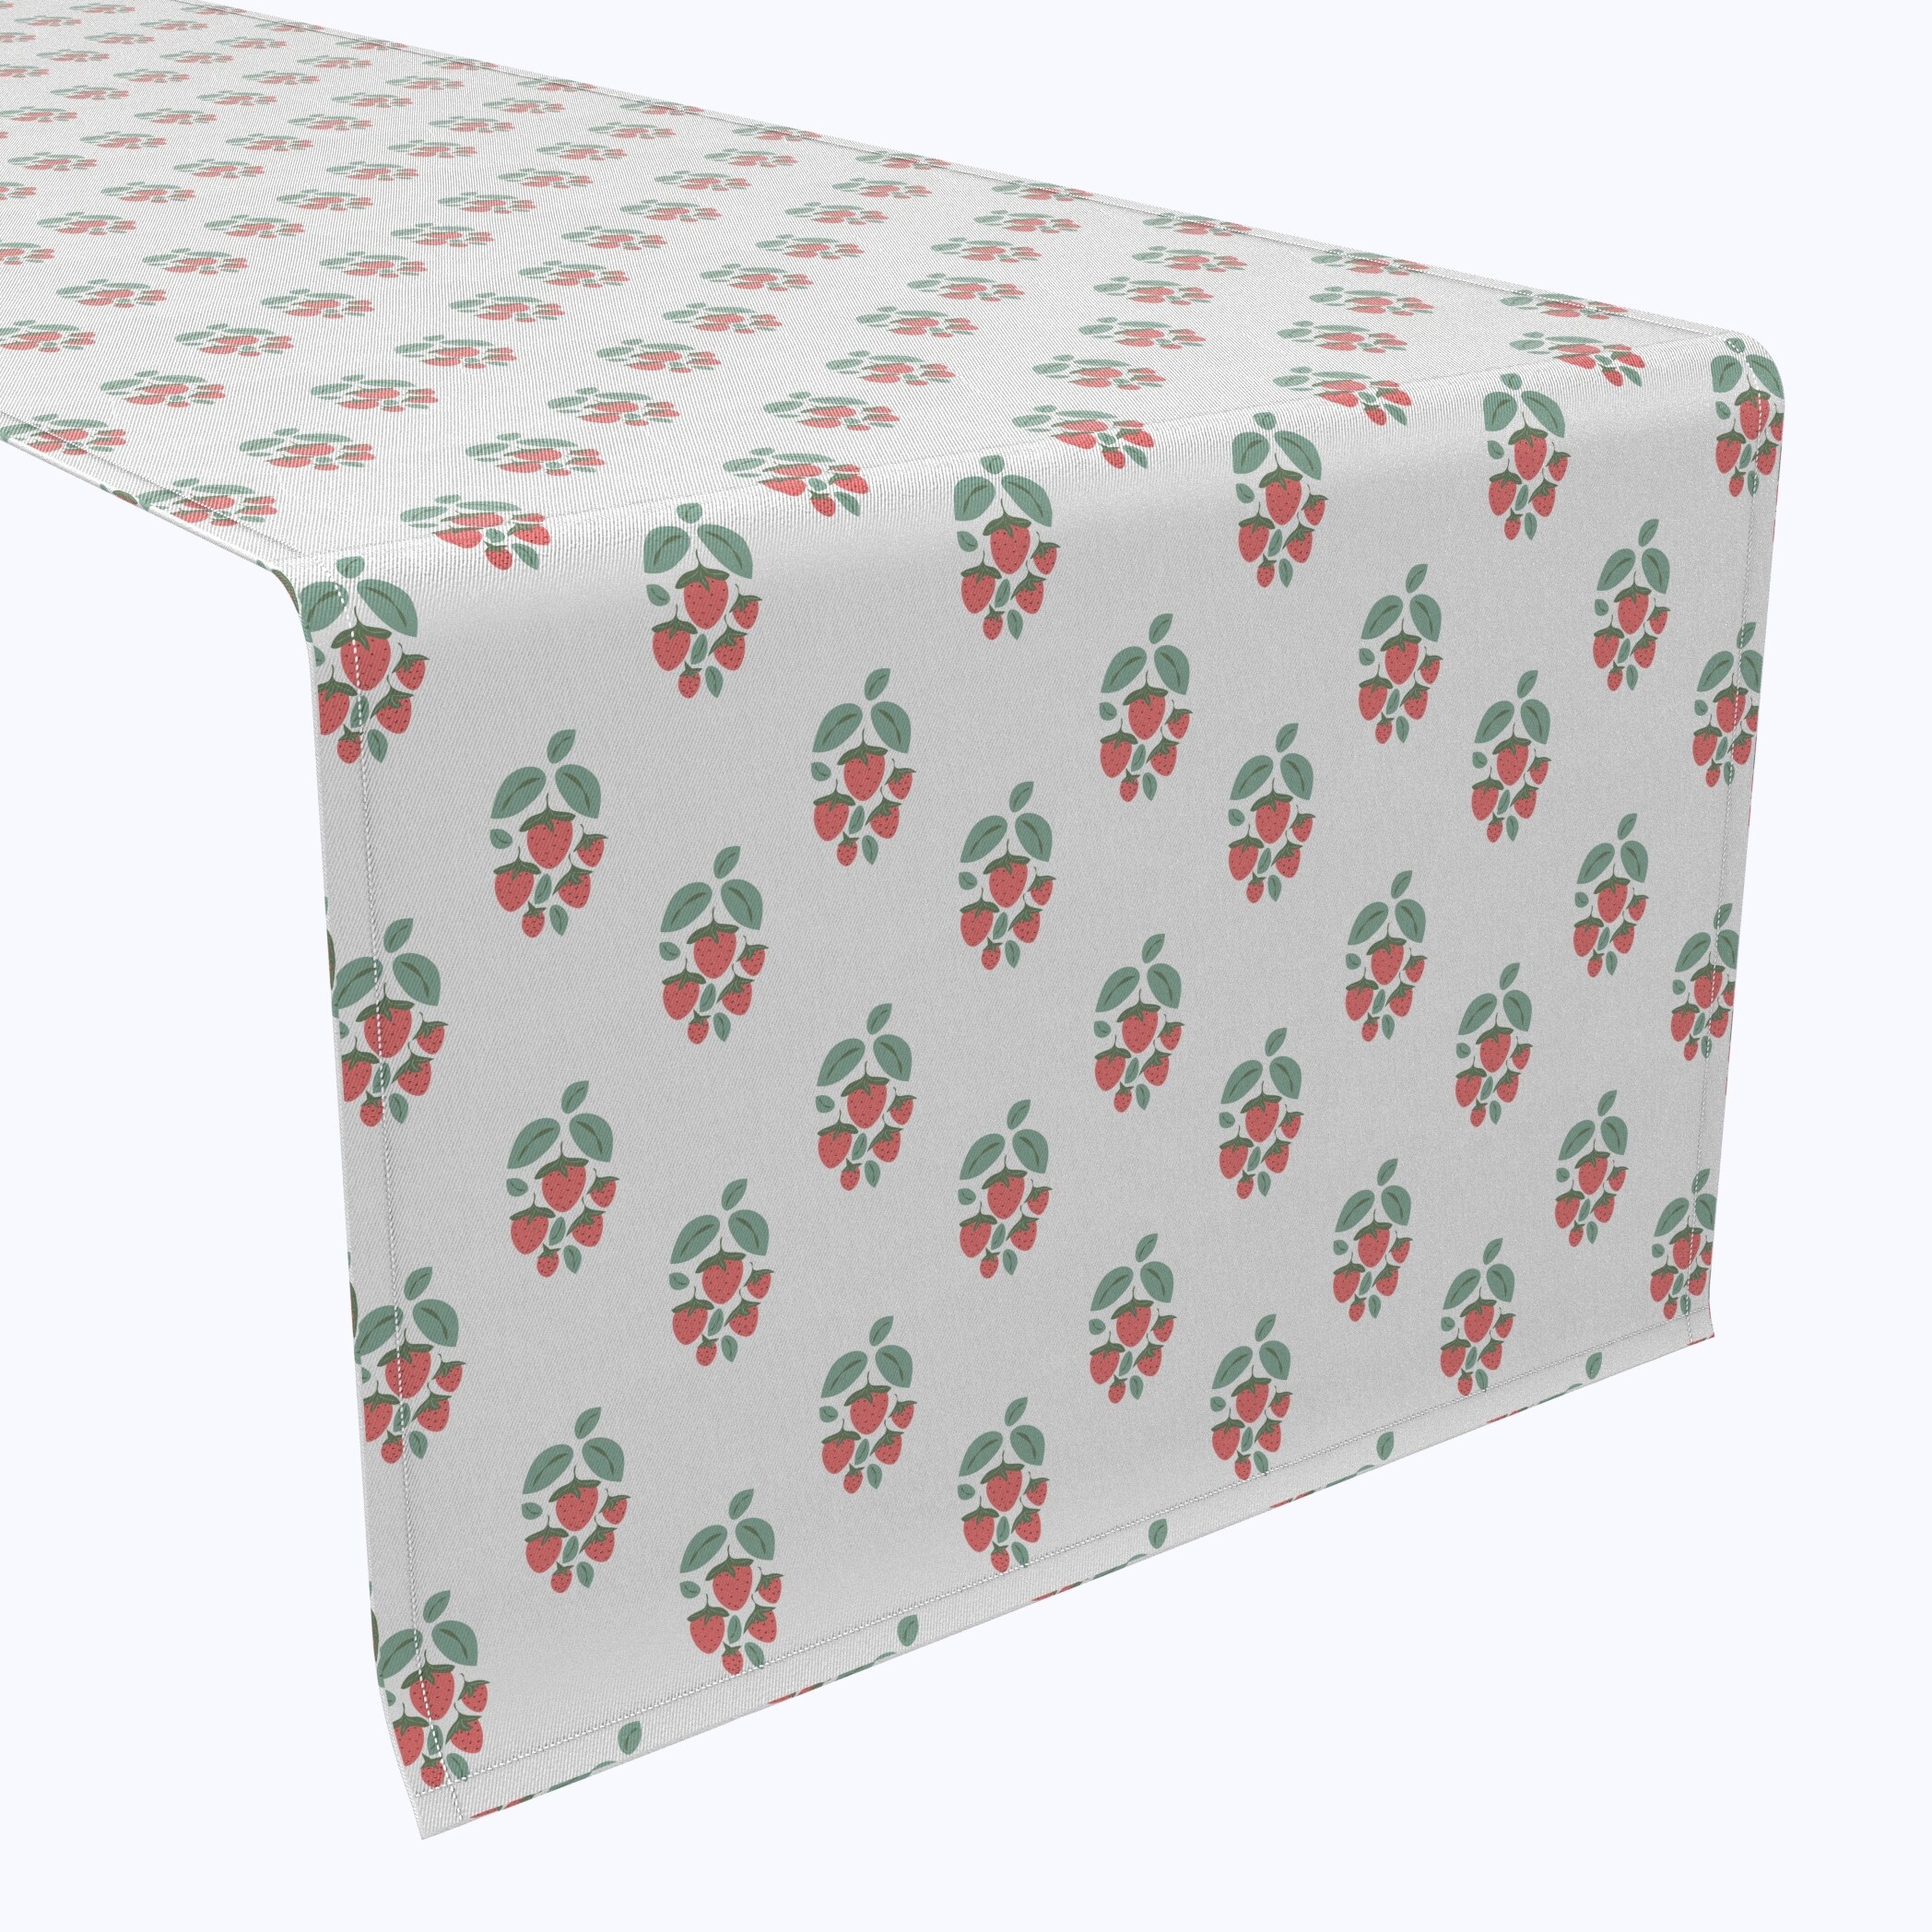 Fabric Textile Products, Inc. Table Runner, 100% Cotton, 16x108", Strawberry Bushes